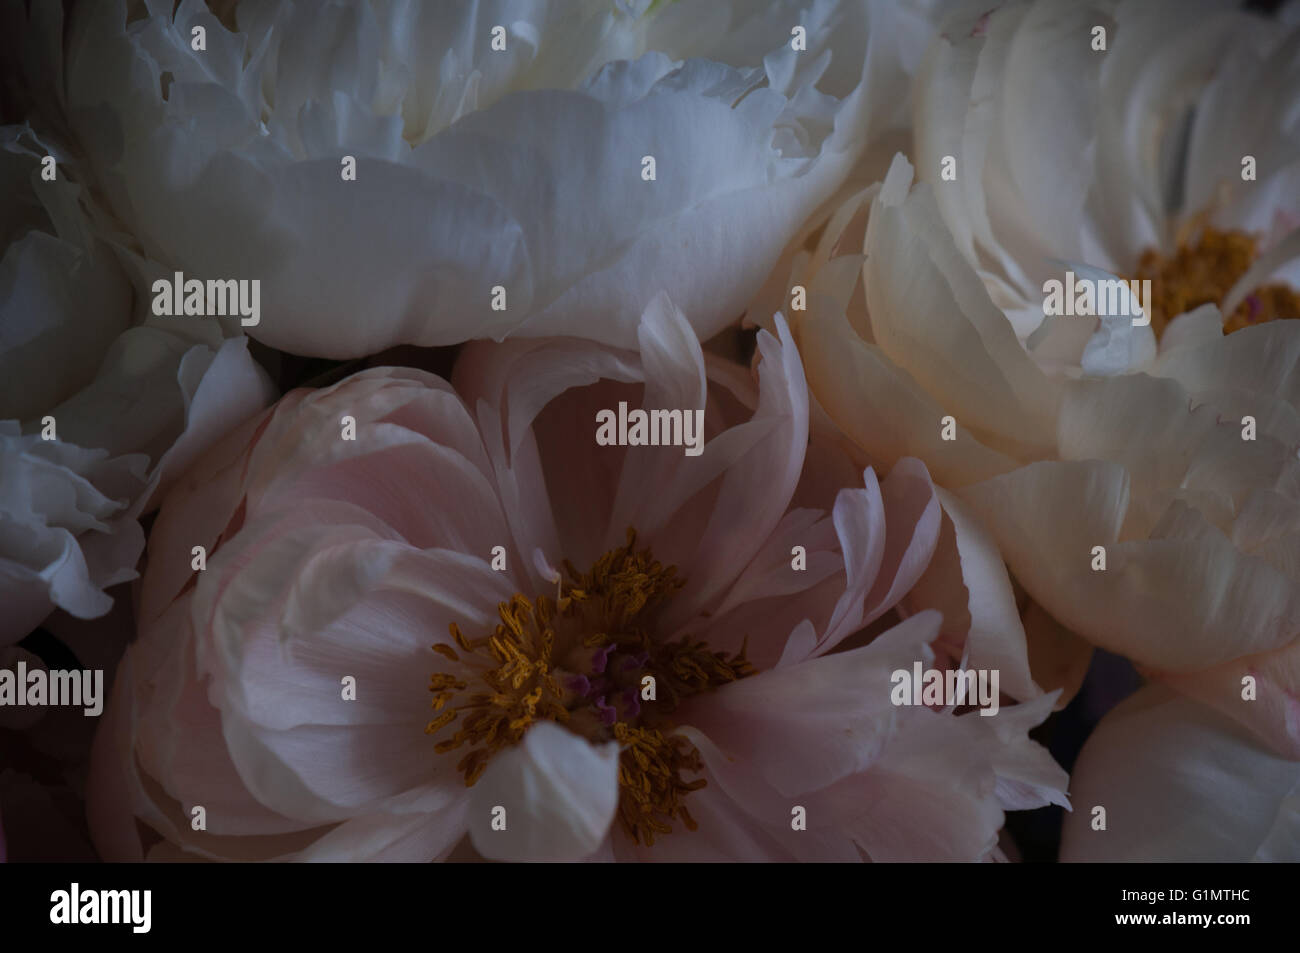 A close-up of delicate white and pink peonies in dark light Stock Photo